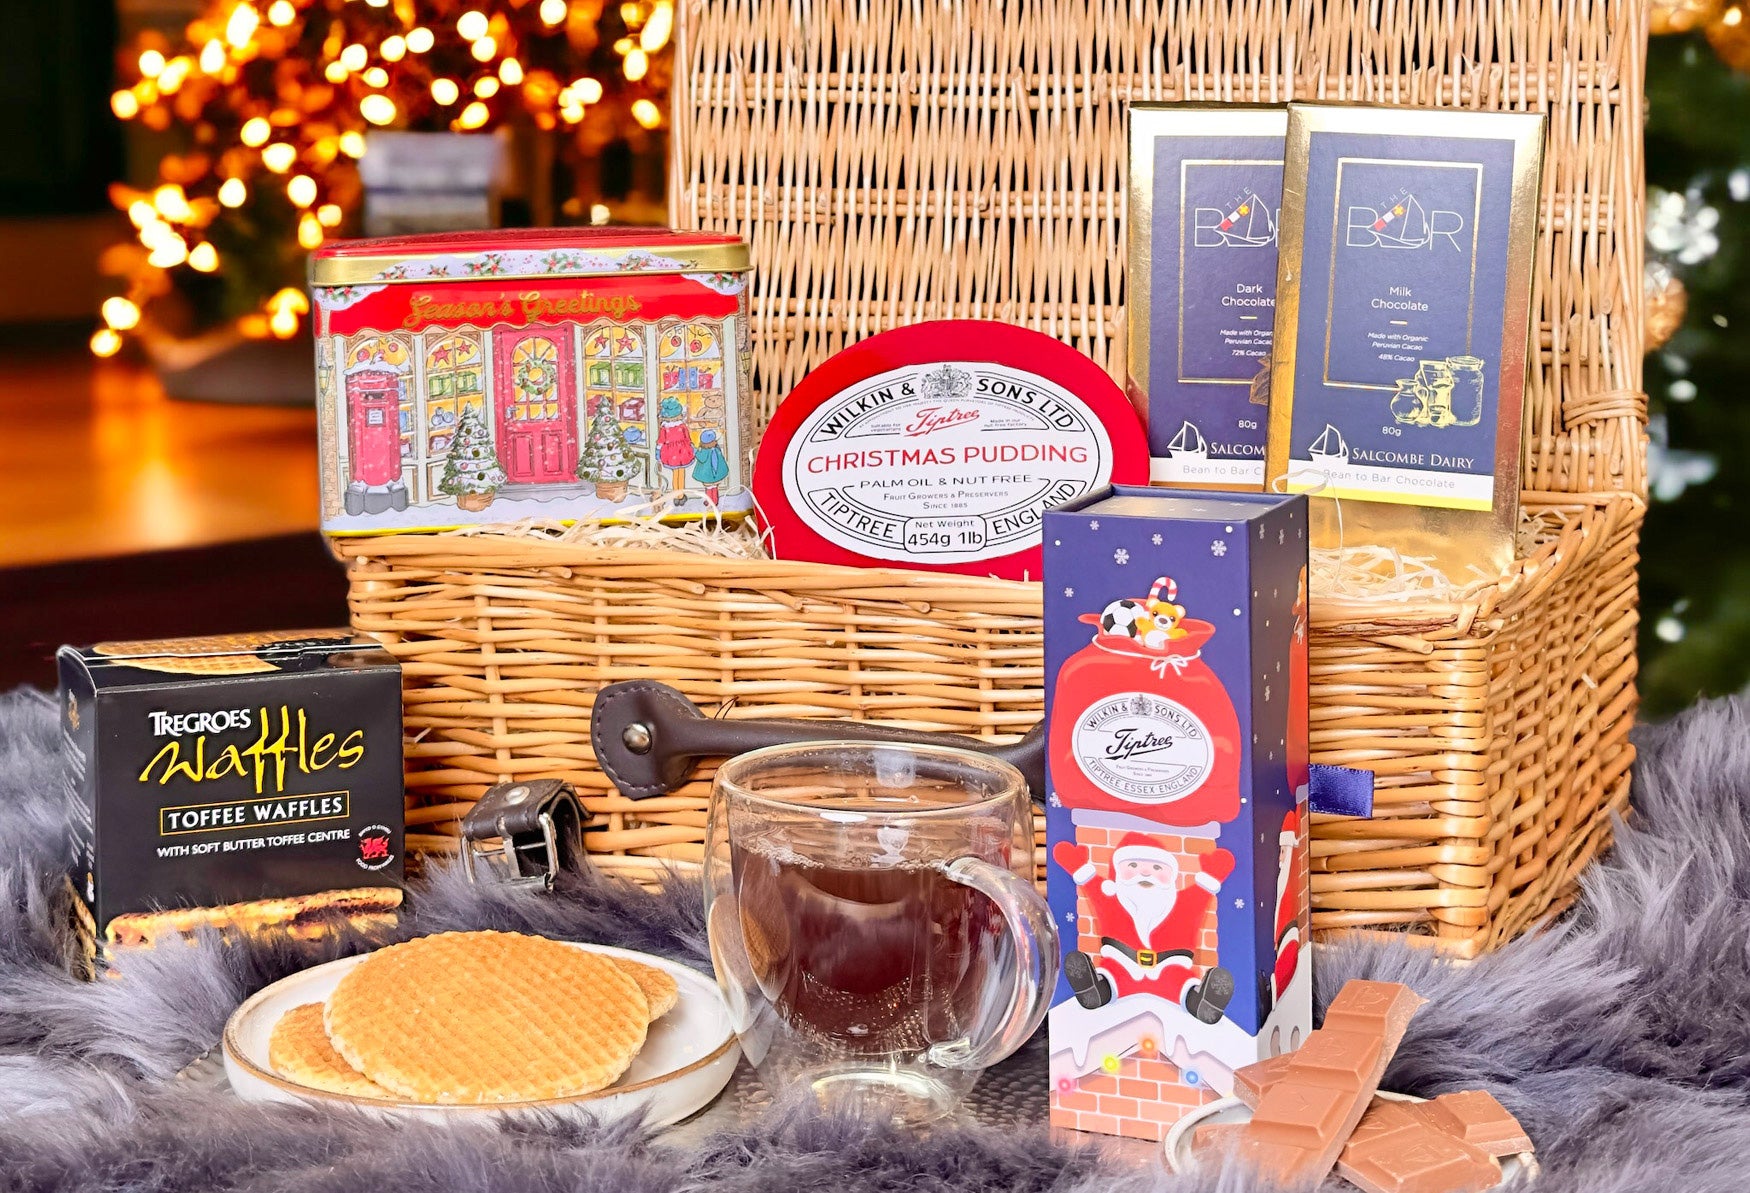 What are the best gifts to give this Christmas for someone with a nut allergy?